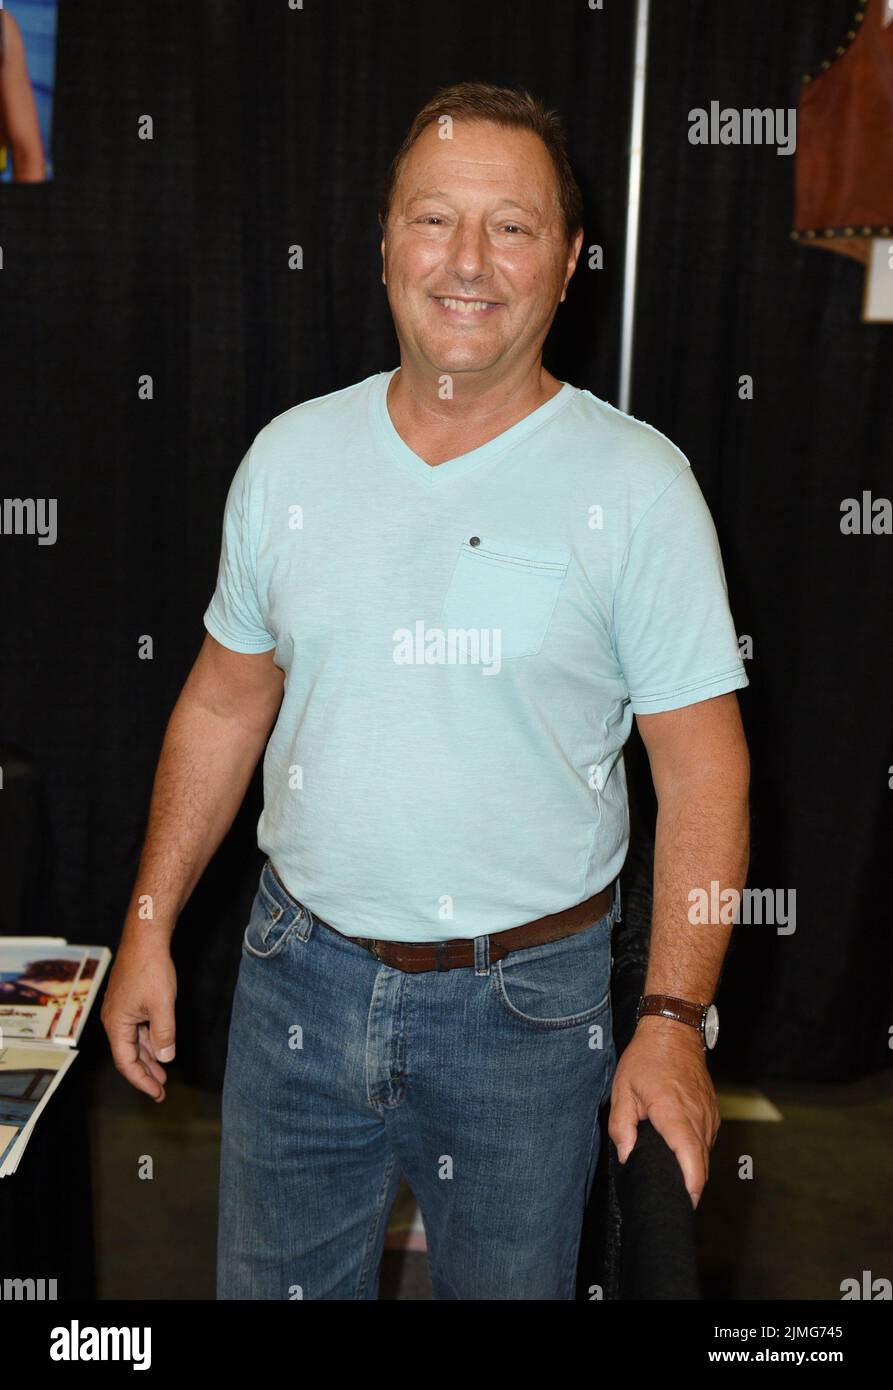 Knoxville, TN, USA. 5th Aug, 2022. Terry Michos in attendance for Fanboy Expo 2022, Knoxville Convention Center, Knoxville, TN August 5, 2022. Credit: Derek Storm/Everett Collection/Alamy Live News Stock Photo